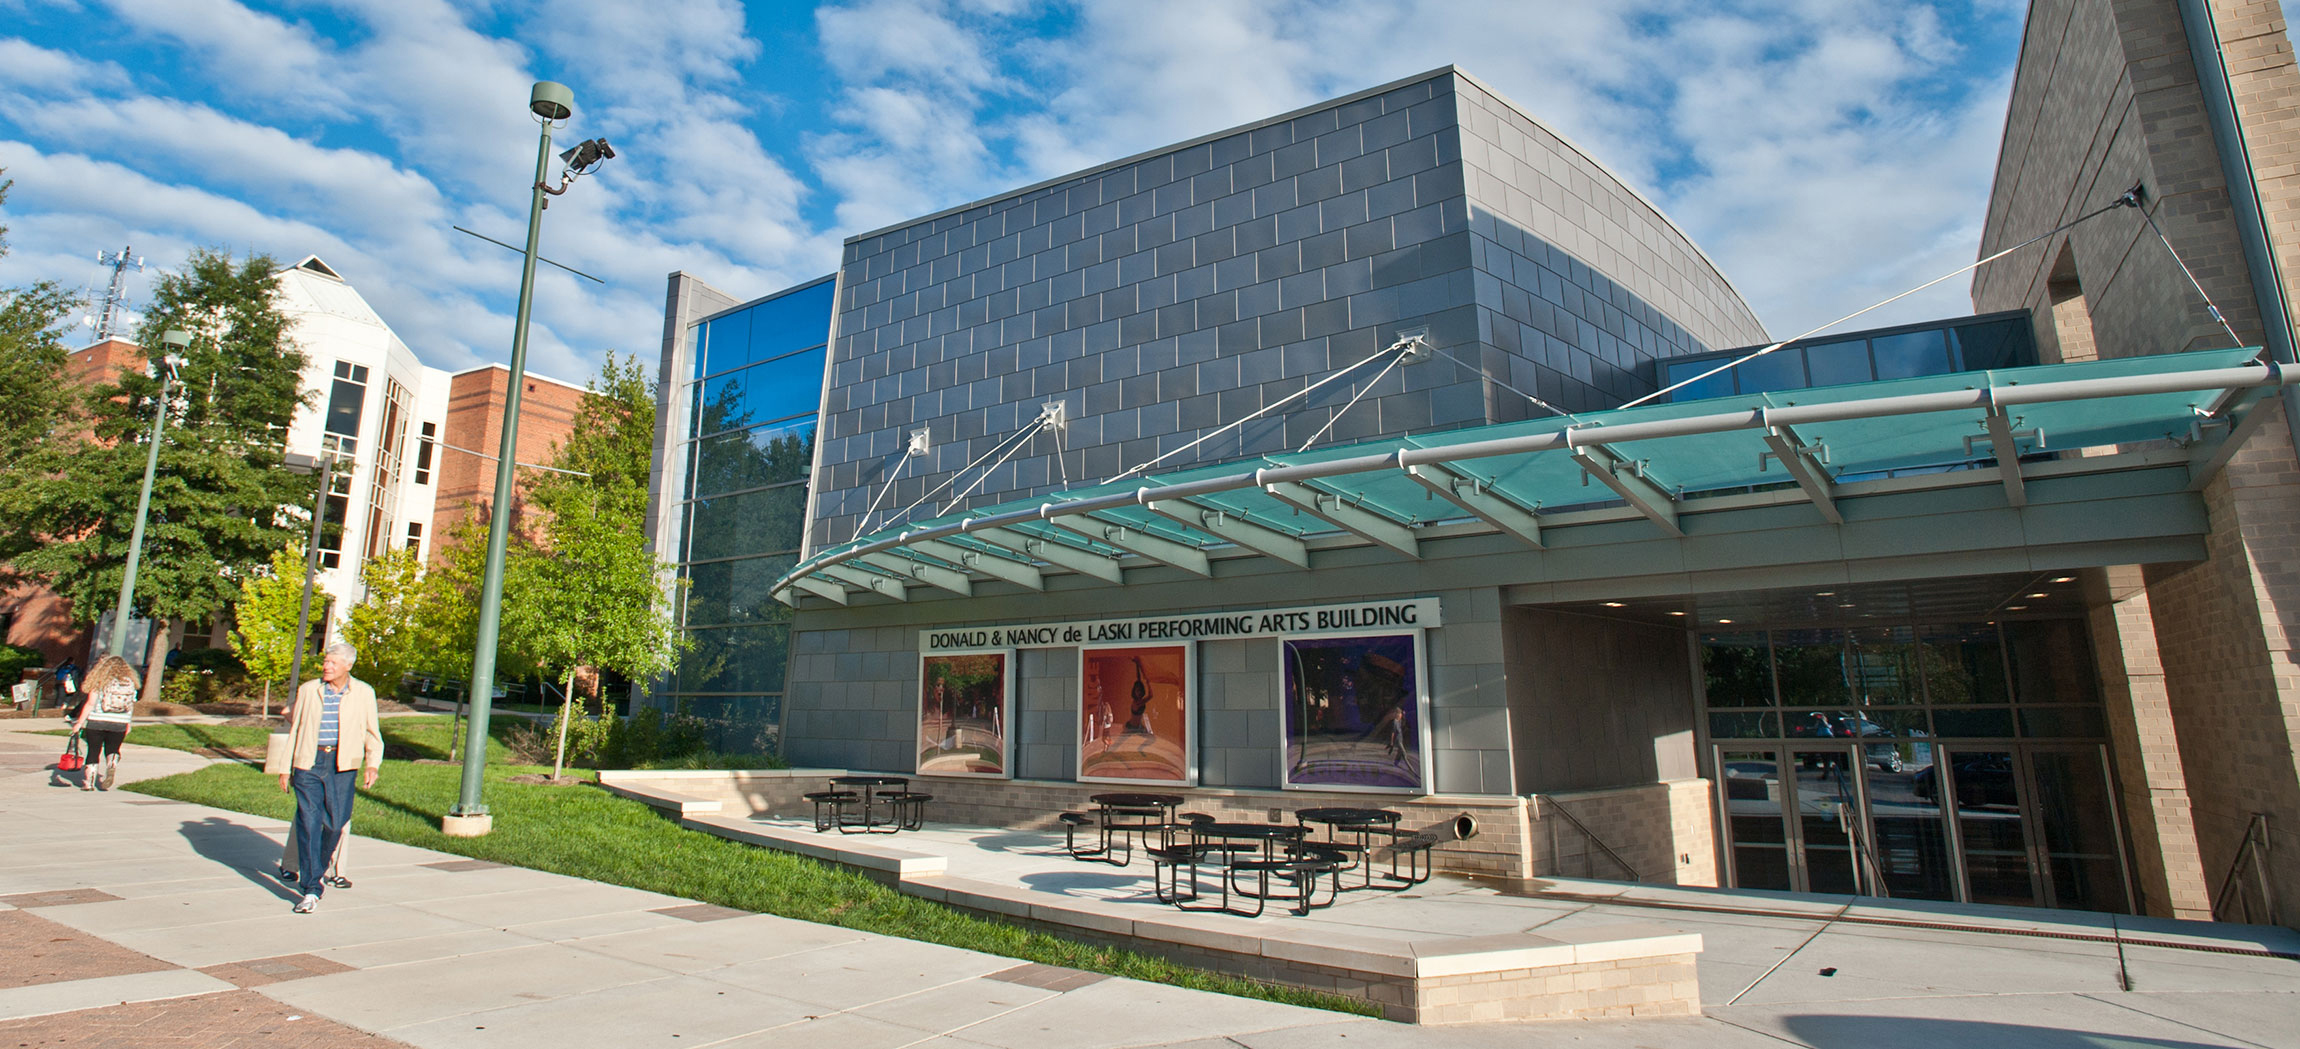 The deLaski Performing Arts Building on the Fairfax campus and home to the Dewberry School of Music.